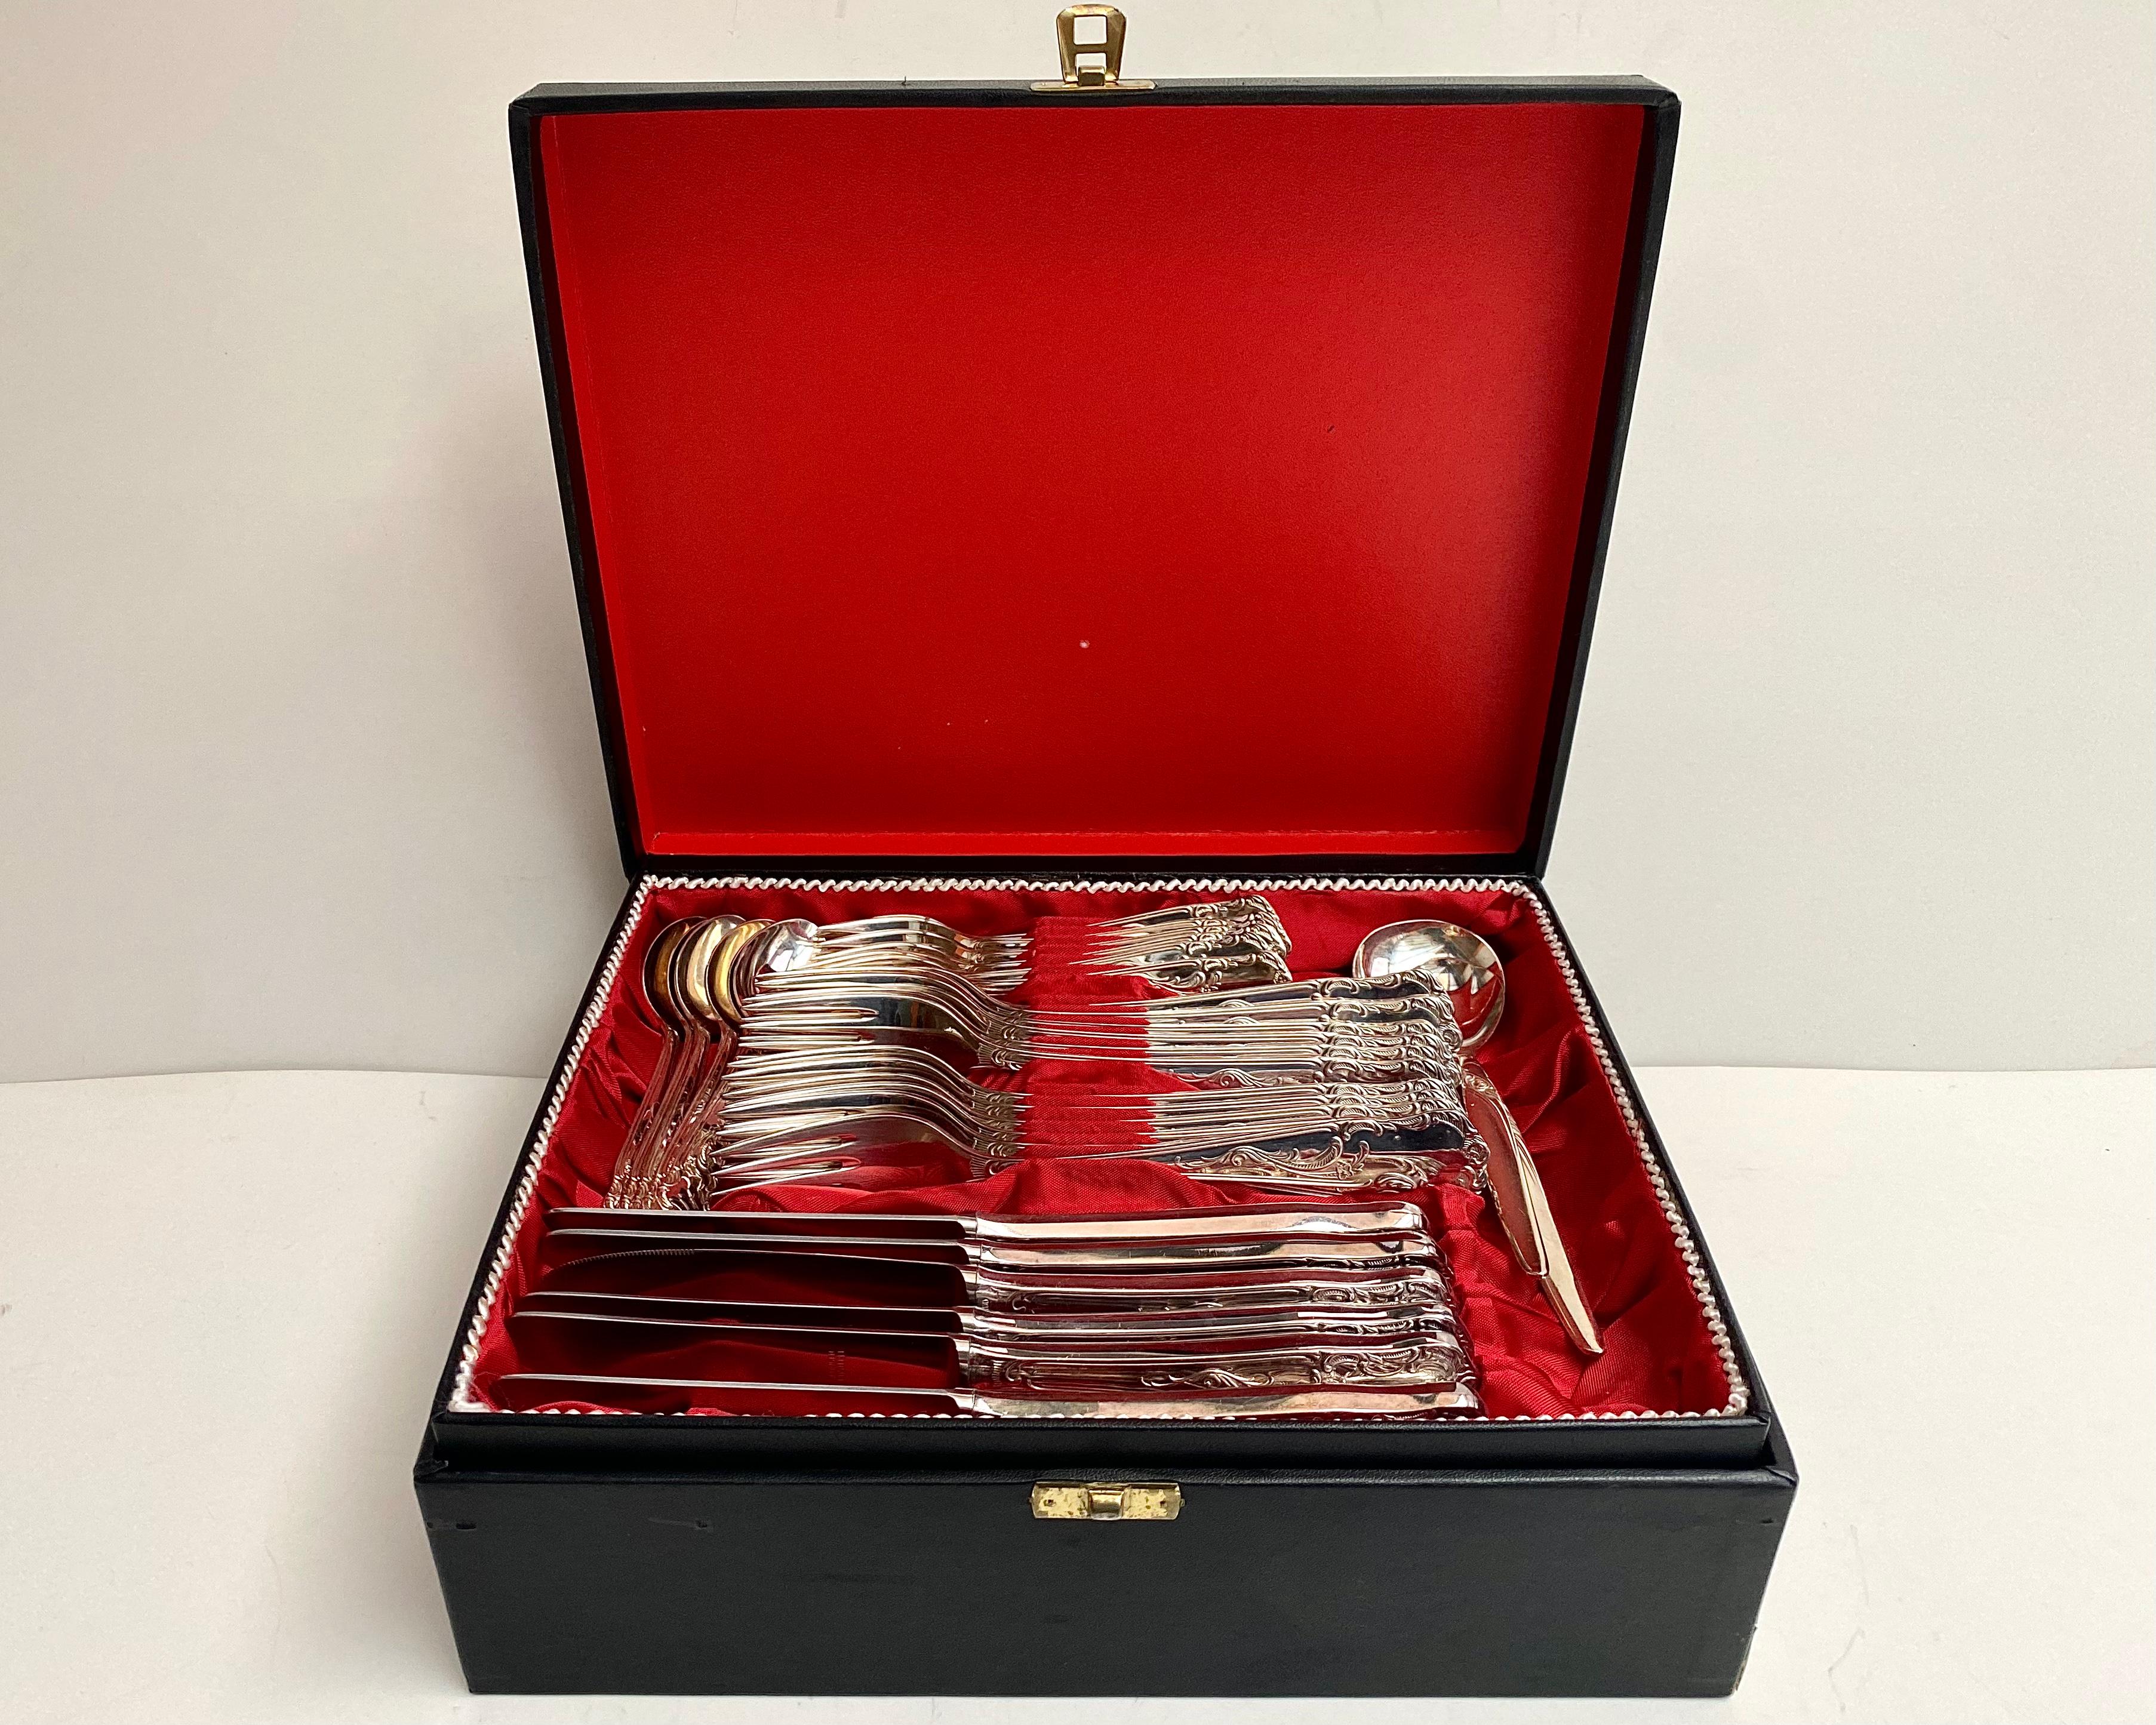 Solingen (Rostfei) set of cutlery set made of high-quality stainless steel in the amount of 60 pieces for 12 people in a stylish package.

Germany, 1950s.

Rust resistant. Mirror polishing technology, resistant to deformation, fits well in the